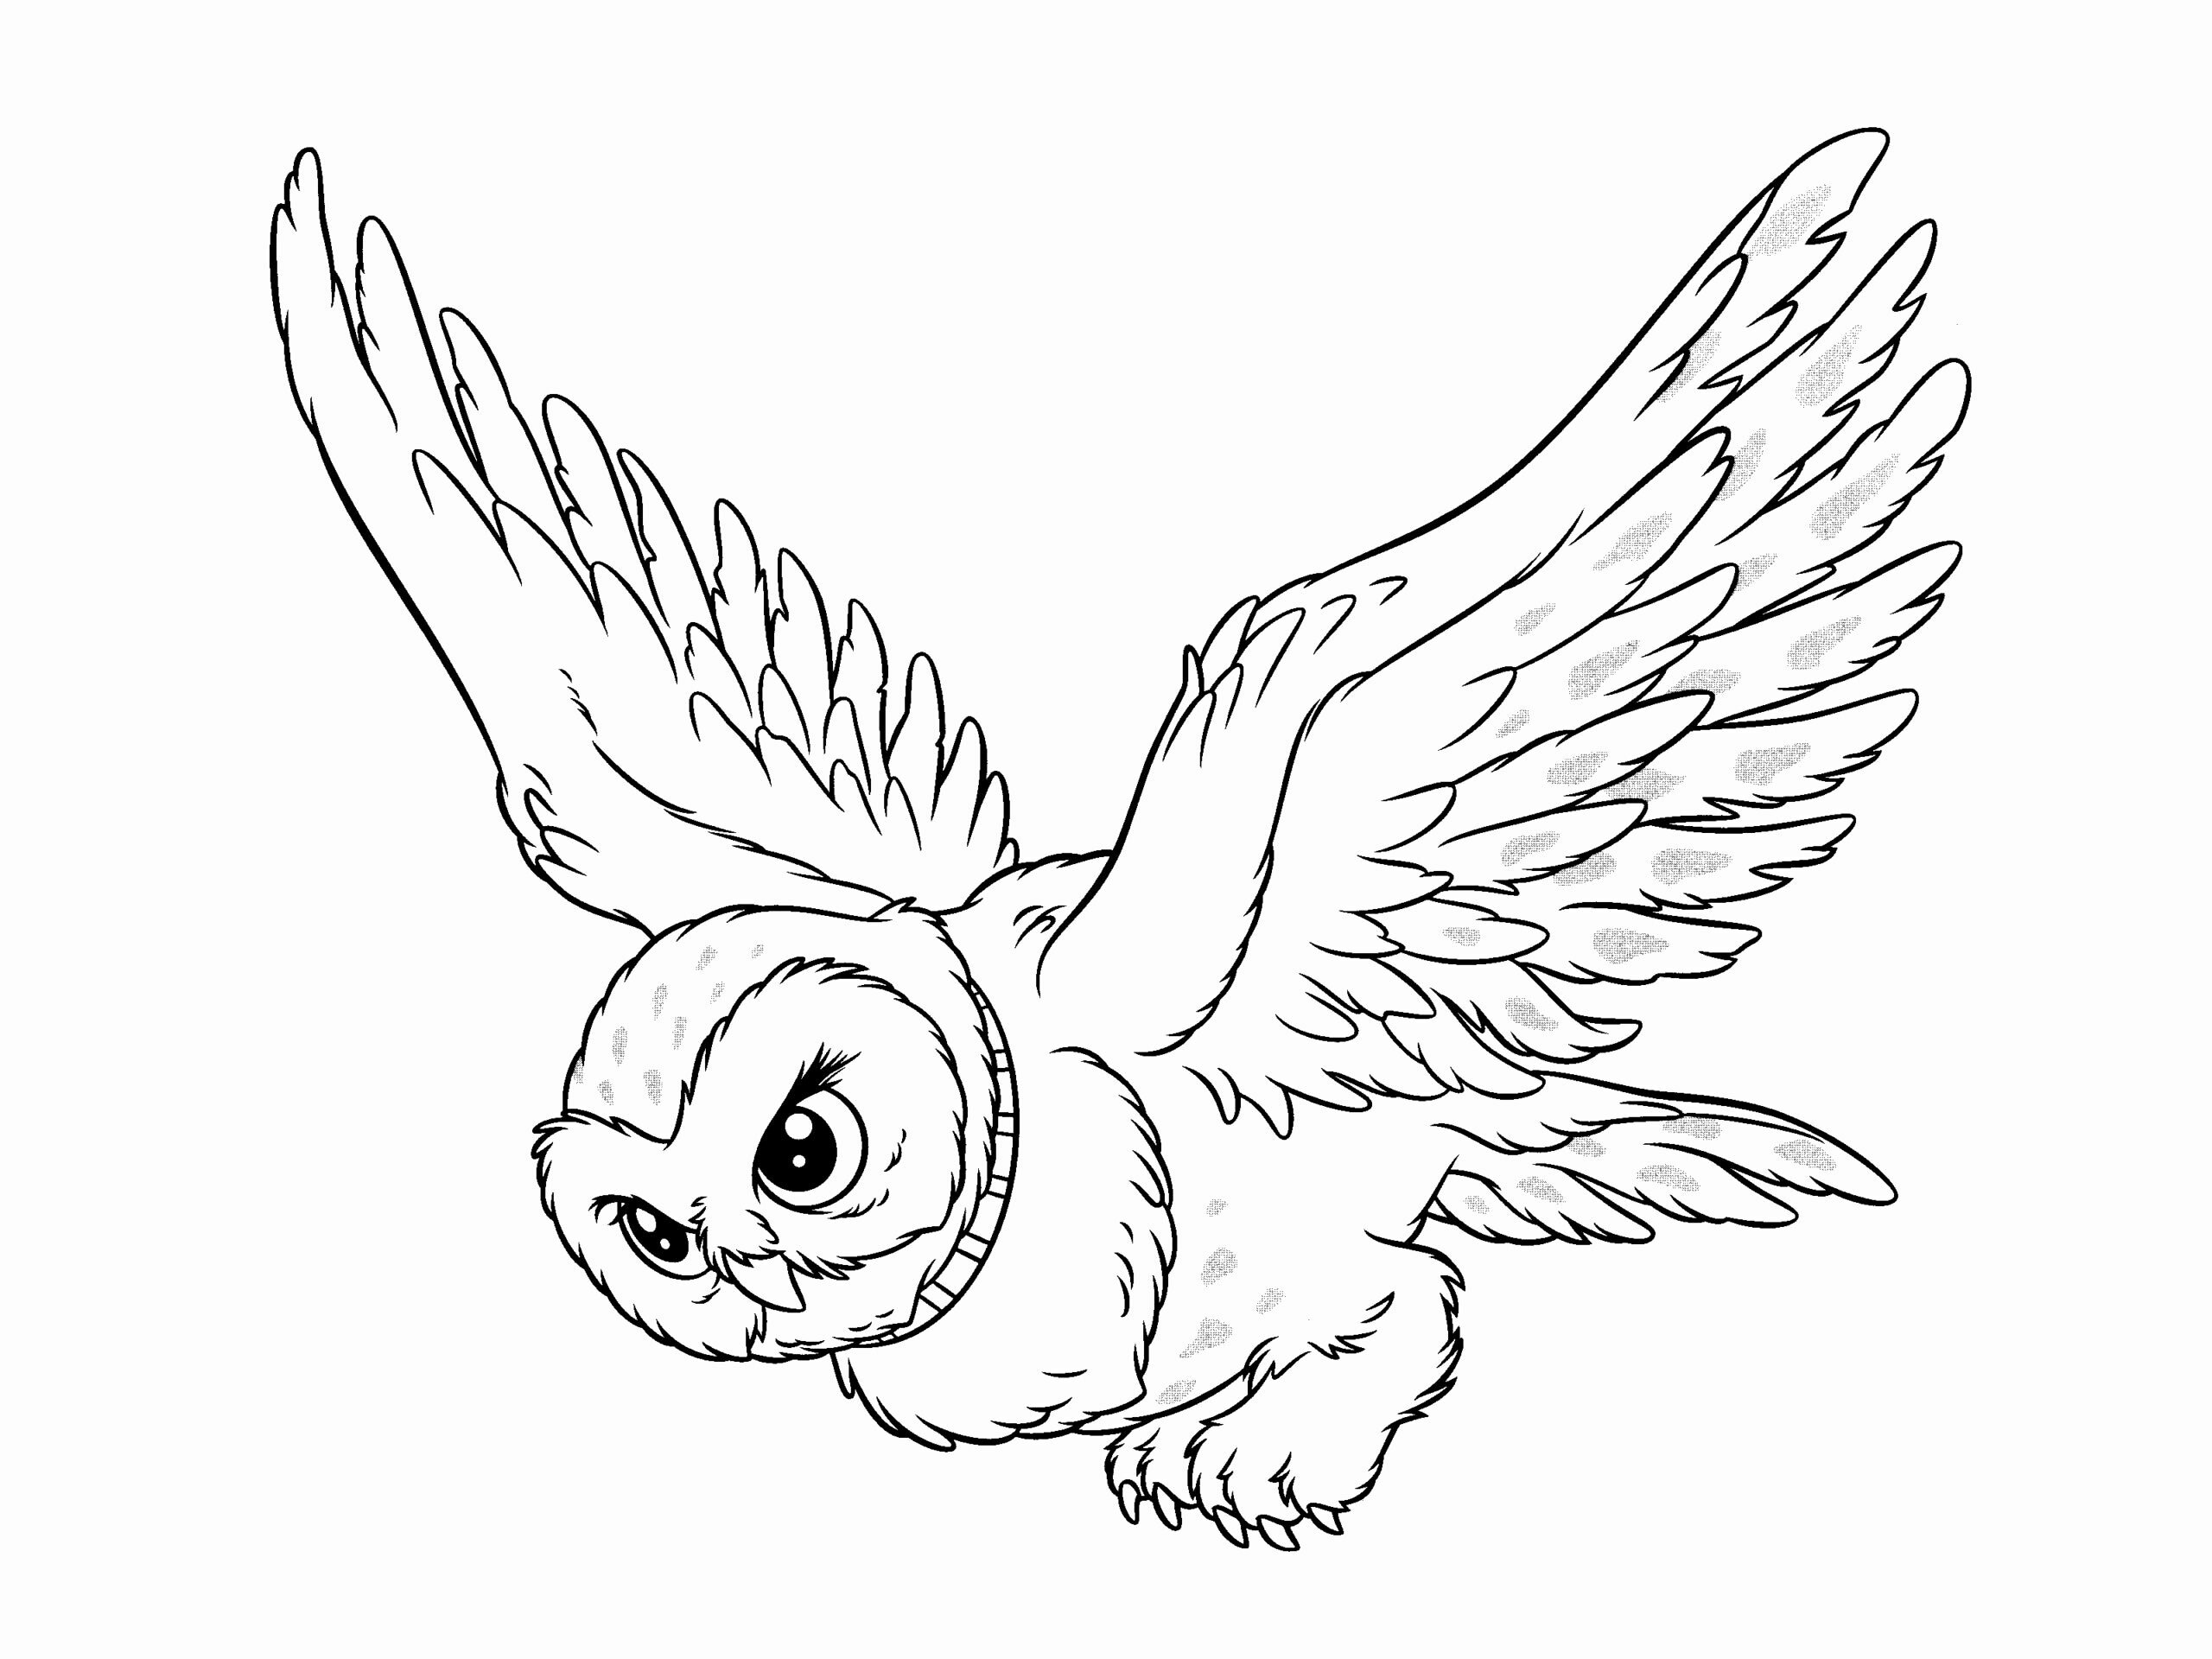 Harry Potter Magical Creatures Coloring Pages - Harry Potter Magical